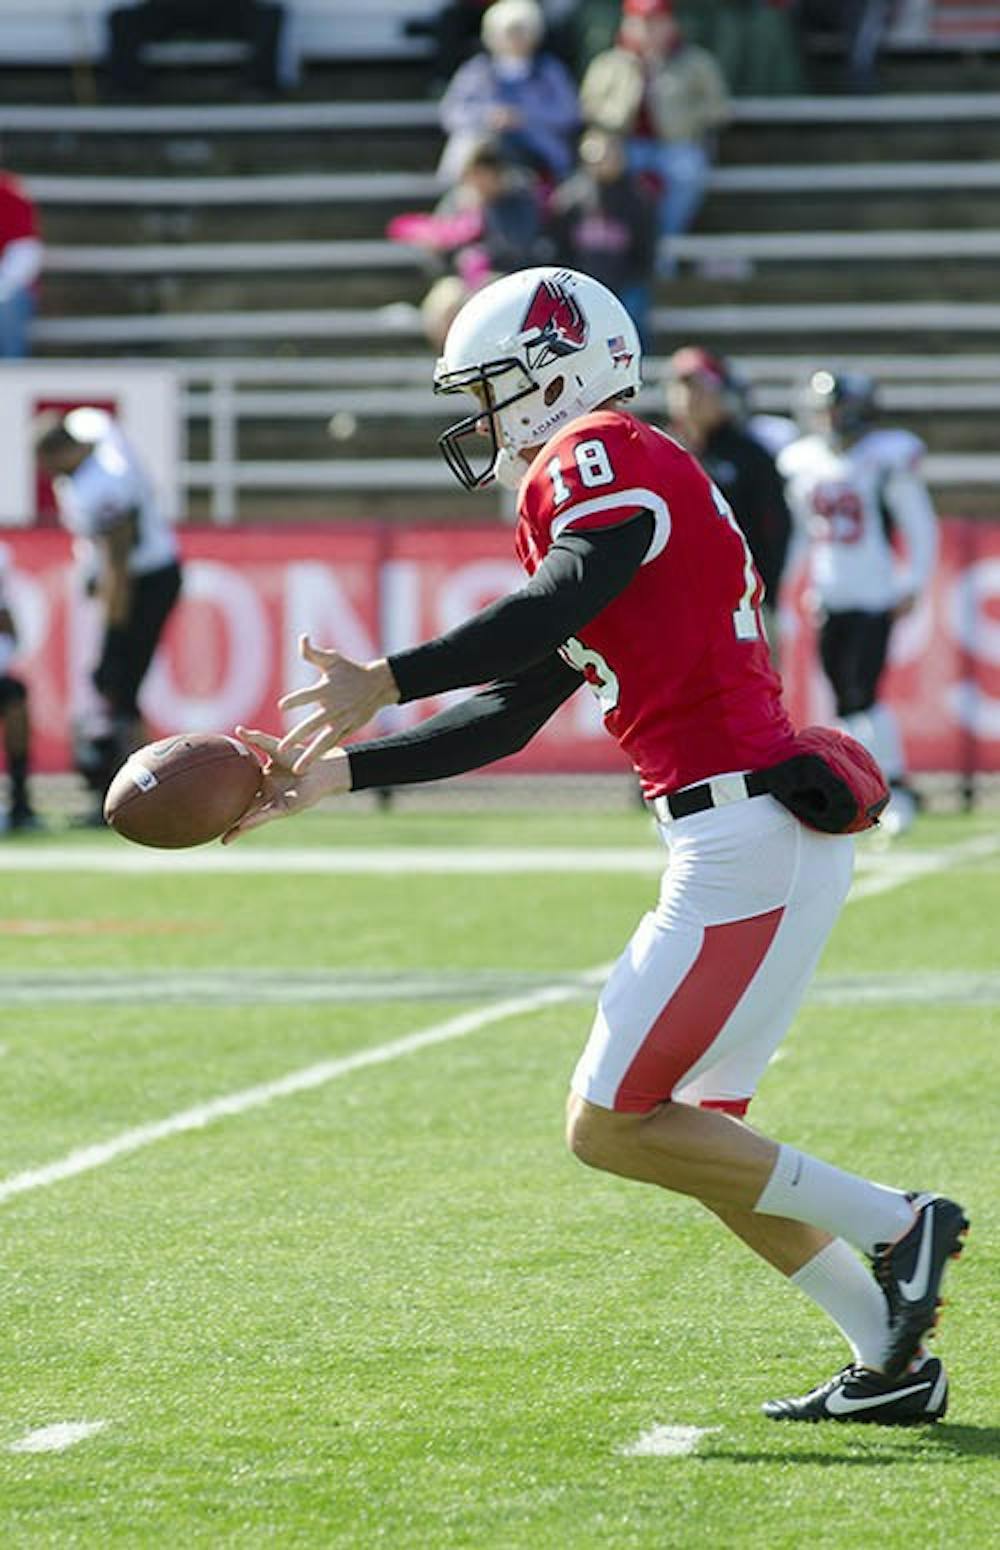 Former Ball State punter Scott Kovanda kicks the ball to Northern Illinois during the game against the Huskies on Oct. 6. Kovanda recently participated in the NFL Scouting Combine in preparation for the 2013 NFL Draft. DN FILE PHOTO COREY OHLENKAMP